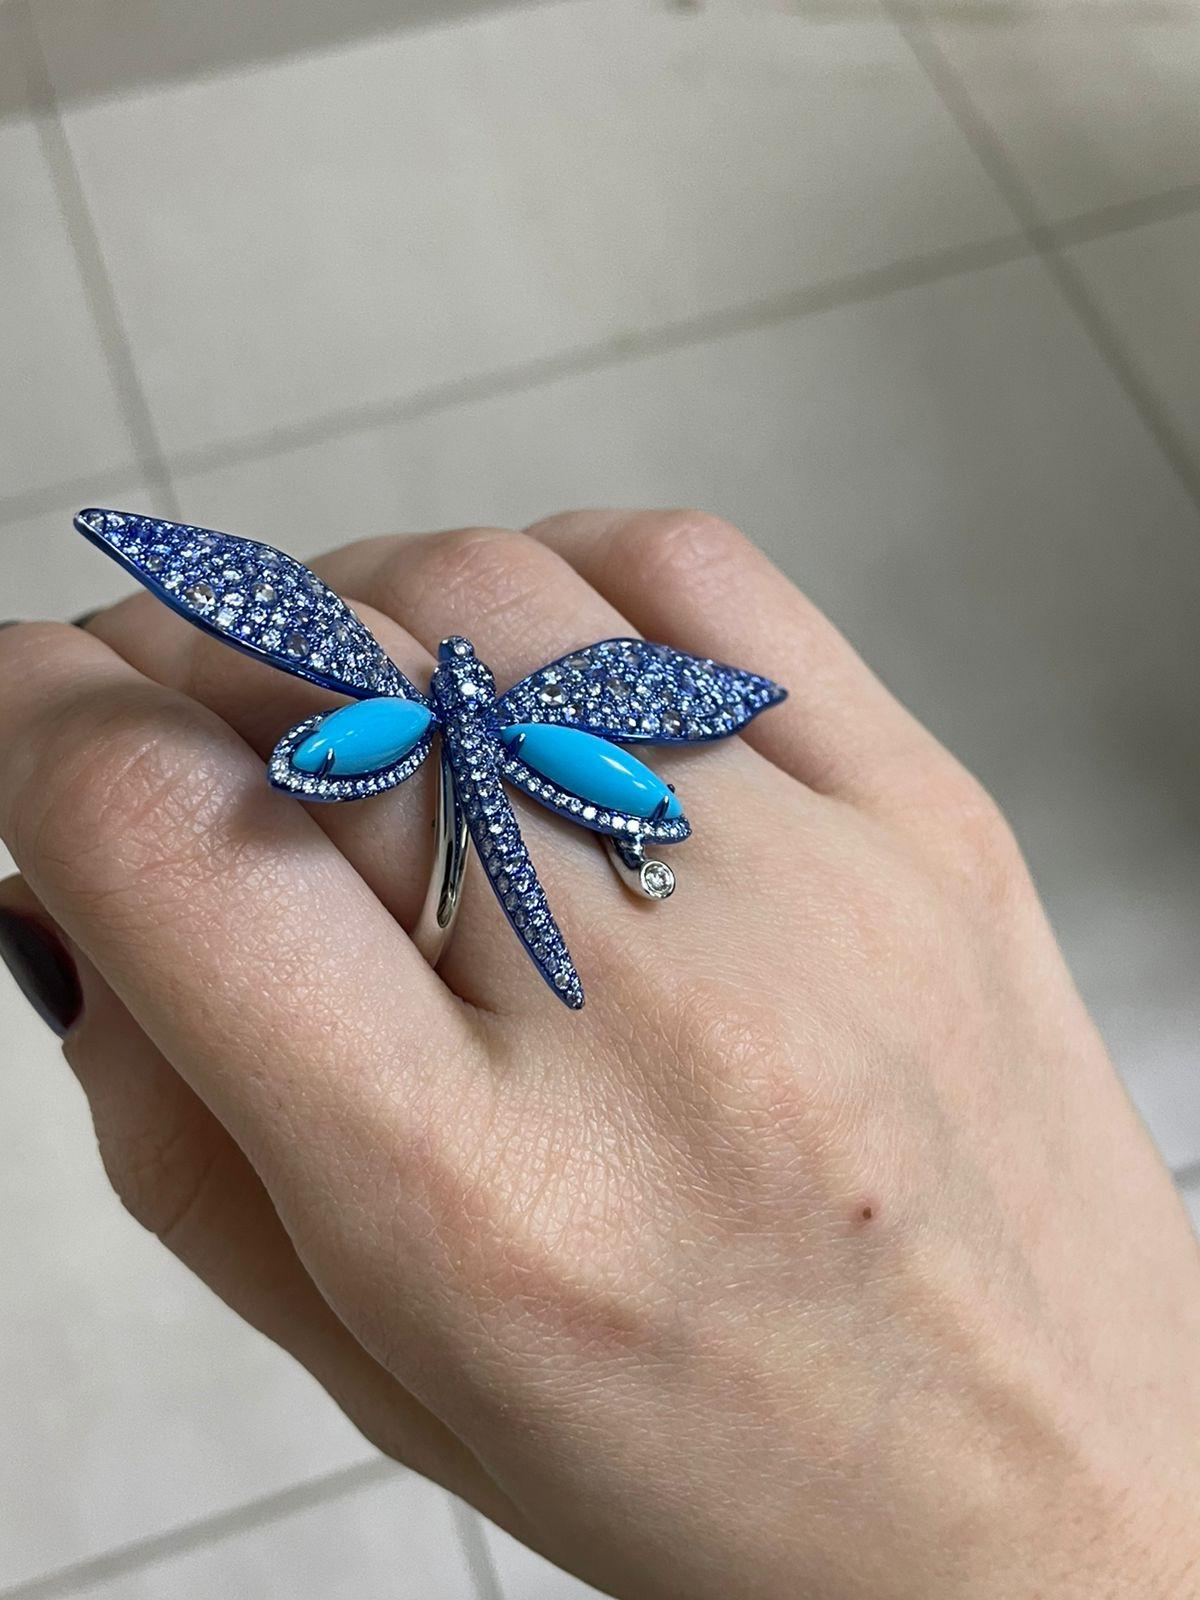 18K While Gold Dragonfly Ring with Turquoise and Round Cut Diamonds In New Condition For Sale In Abu Dhabi, Abu Dhabi